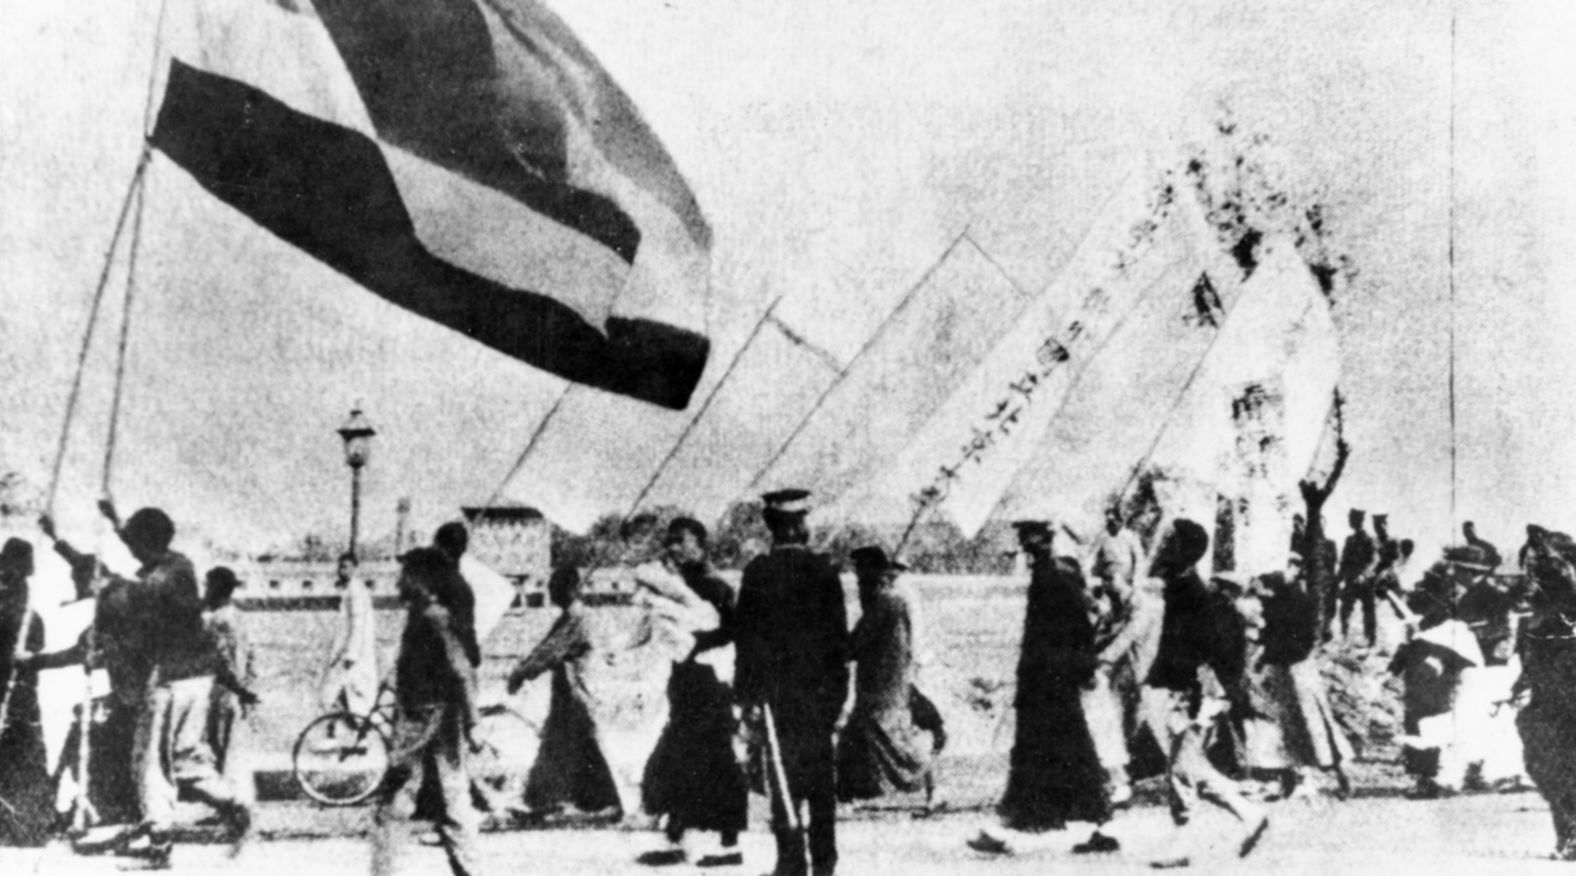 The Chinese Communist Party traces its roots to the May Fourth Movement of 1919. On May 4, 1919, student demonstrators took to the streets of Beijing in huge numbers to protest negotiations over the Treaty of Versailles, the peace deal drawn up to end World War I. Even though China was on the winning side, the Western powers had decided to hand over Germany's former concessions in the eastern Chinese province of Shandong to Japan. (Japan, with support from the British, had captured the port of Qingdao in Shandong from the Germans in 1914.)  <br /><br />This news outraged Chinese students, including those from the prestigious Peking University, pictured here. As thousands of students marched toward Tiananmen Gate, Japanese goods and books were piled up and burned on the streets. The protesters also focused their anger on their own government, which they saw as weak and ineffective in the face of Western imperialism.  <br /><br />Two years later, the Chinese Communist Party was founded in Shanghai.